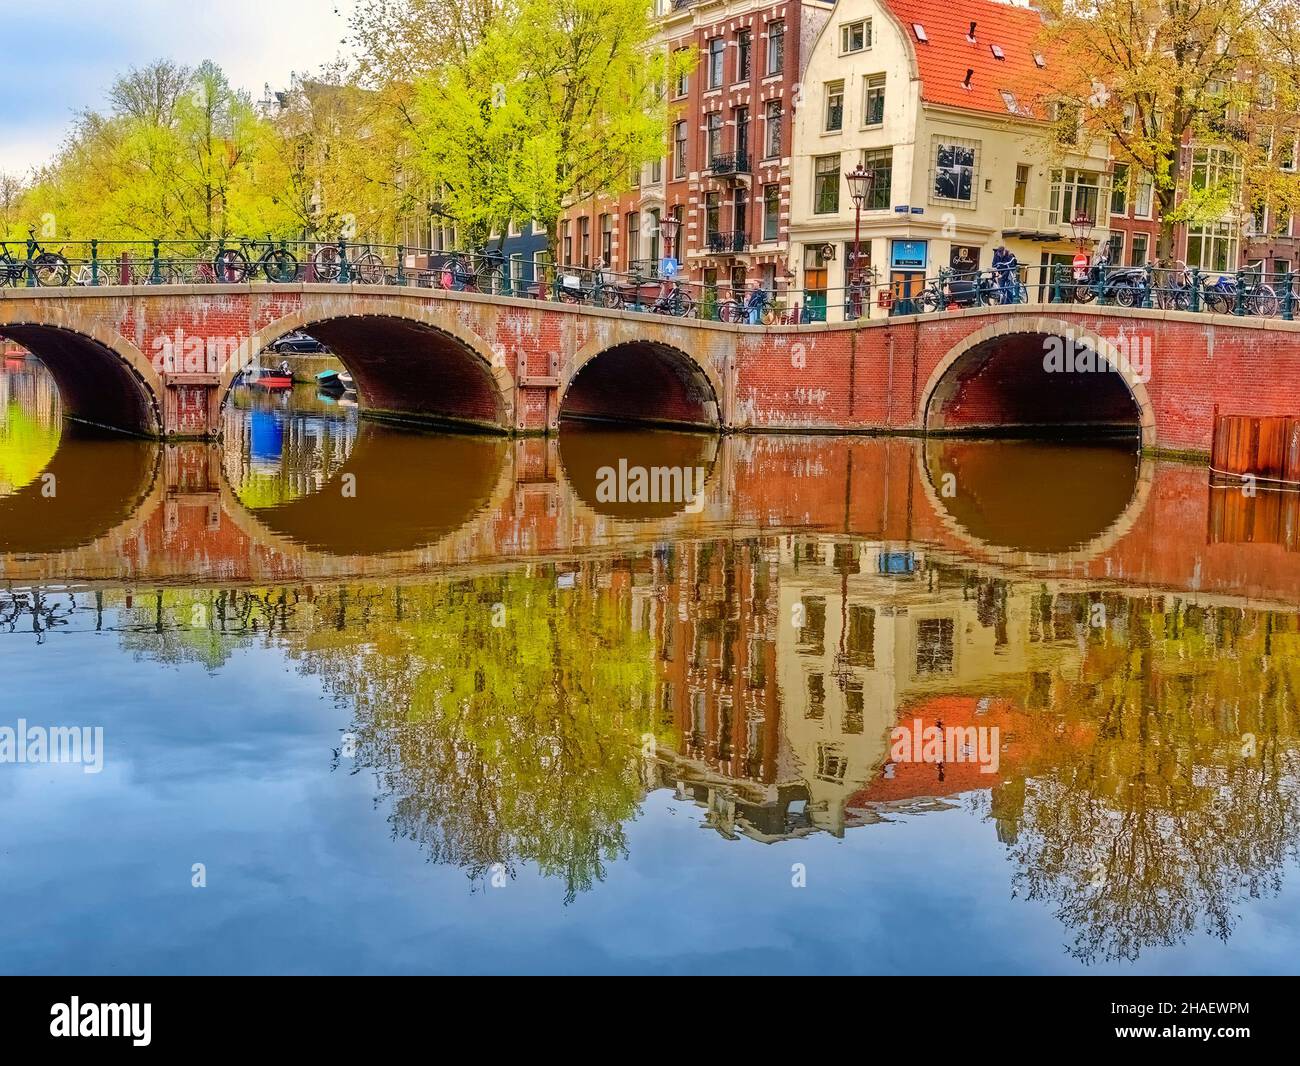 canal, house, amsterdam, holland, city, travel, netherlands, architecture, bridge, building, europe, river, tree, skyline, window, bicycle, dutch, urb Stock Photo